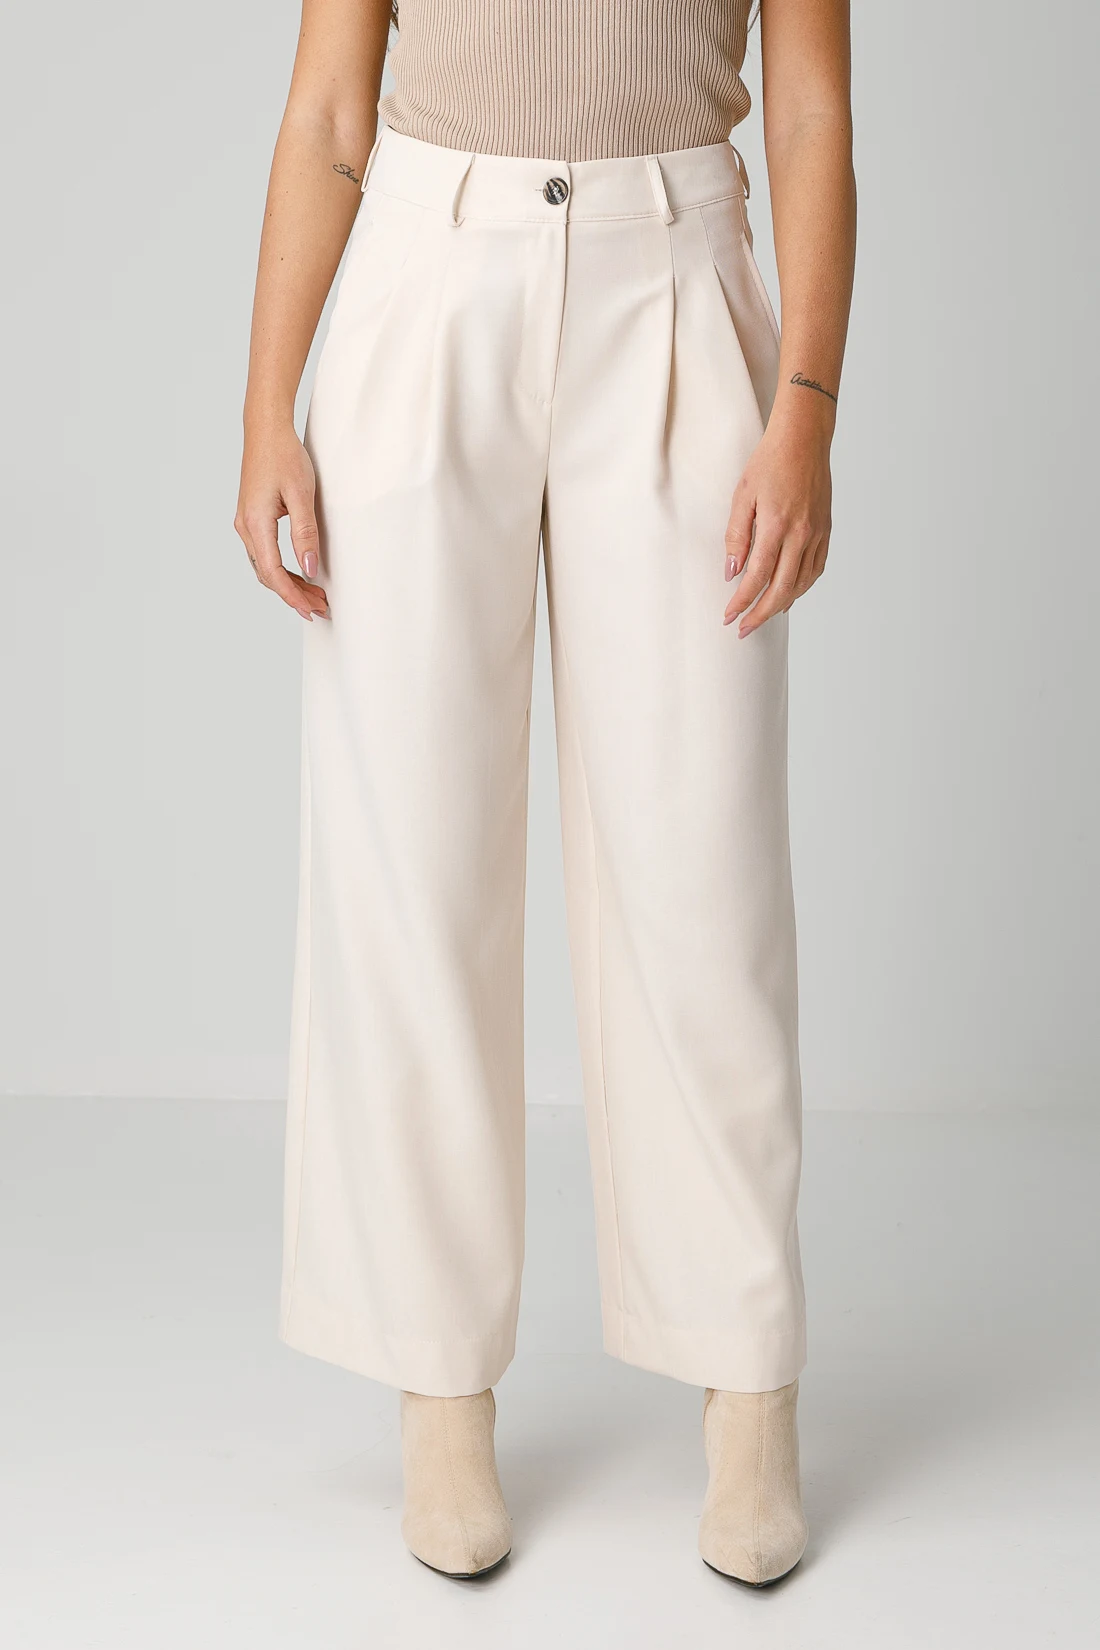 SINBES TROUSERS - BEIGE